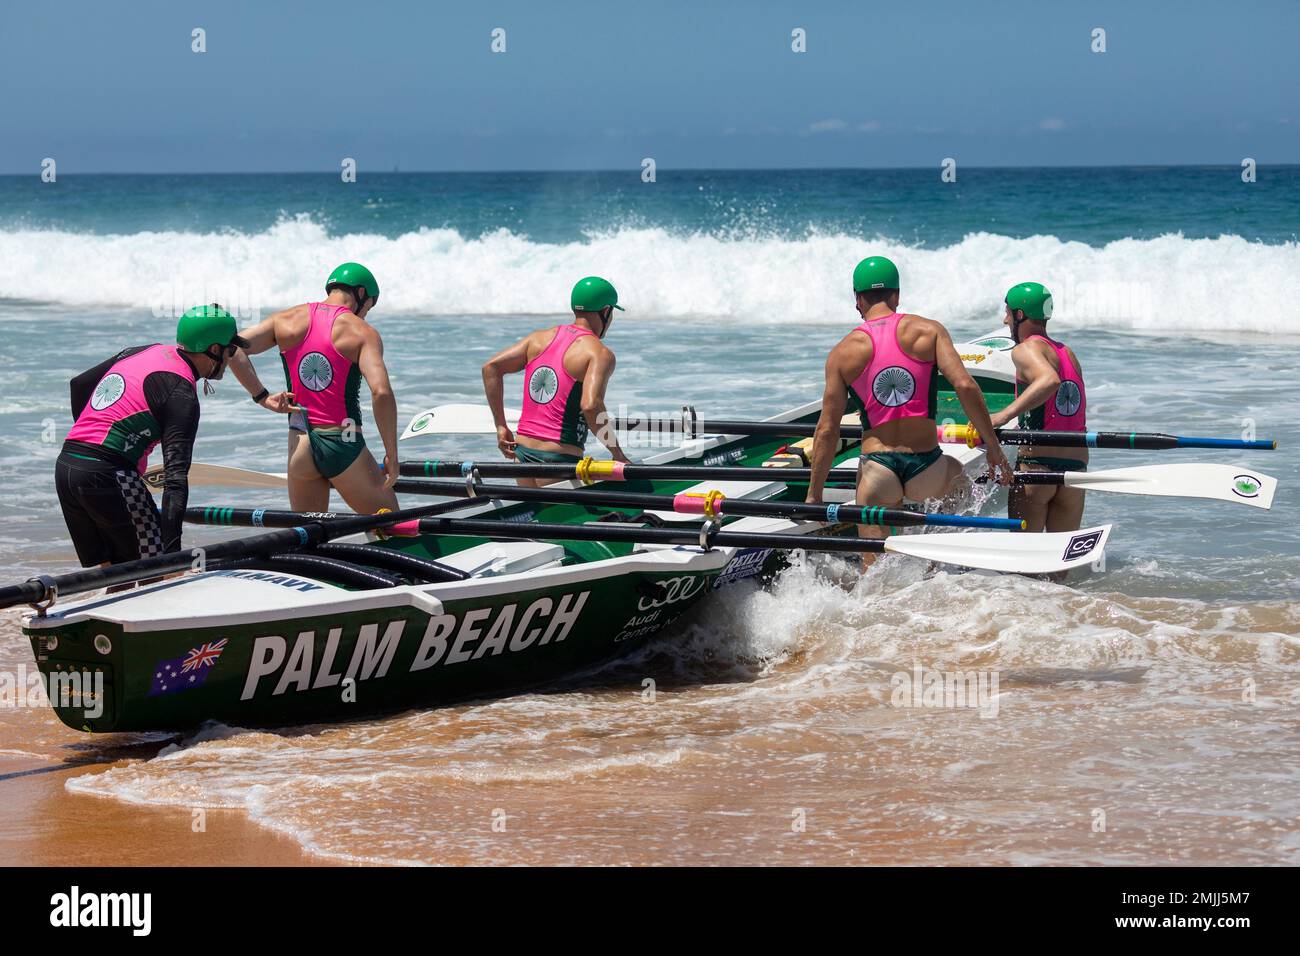 Palm Beach Sydney, traditional surfboat racing on Narrabeen Beach, Palm Beach mens team prepares for next carnival heat, surfboat premiership Aus Stock Photo